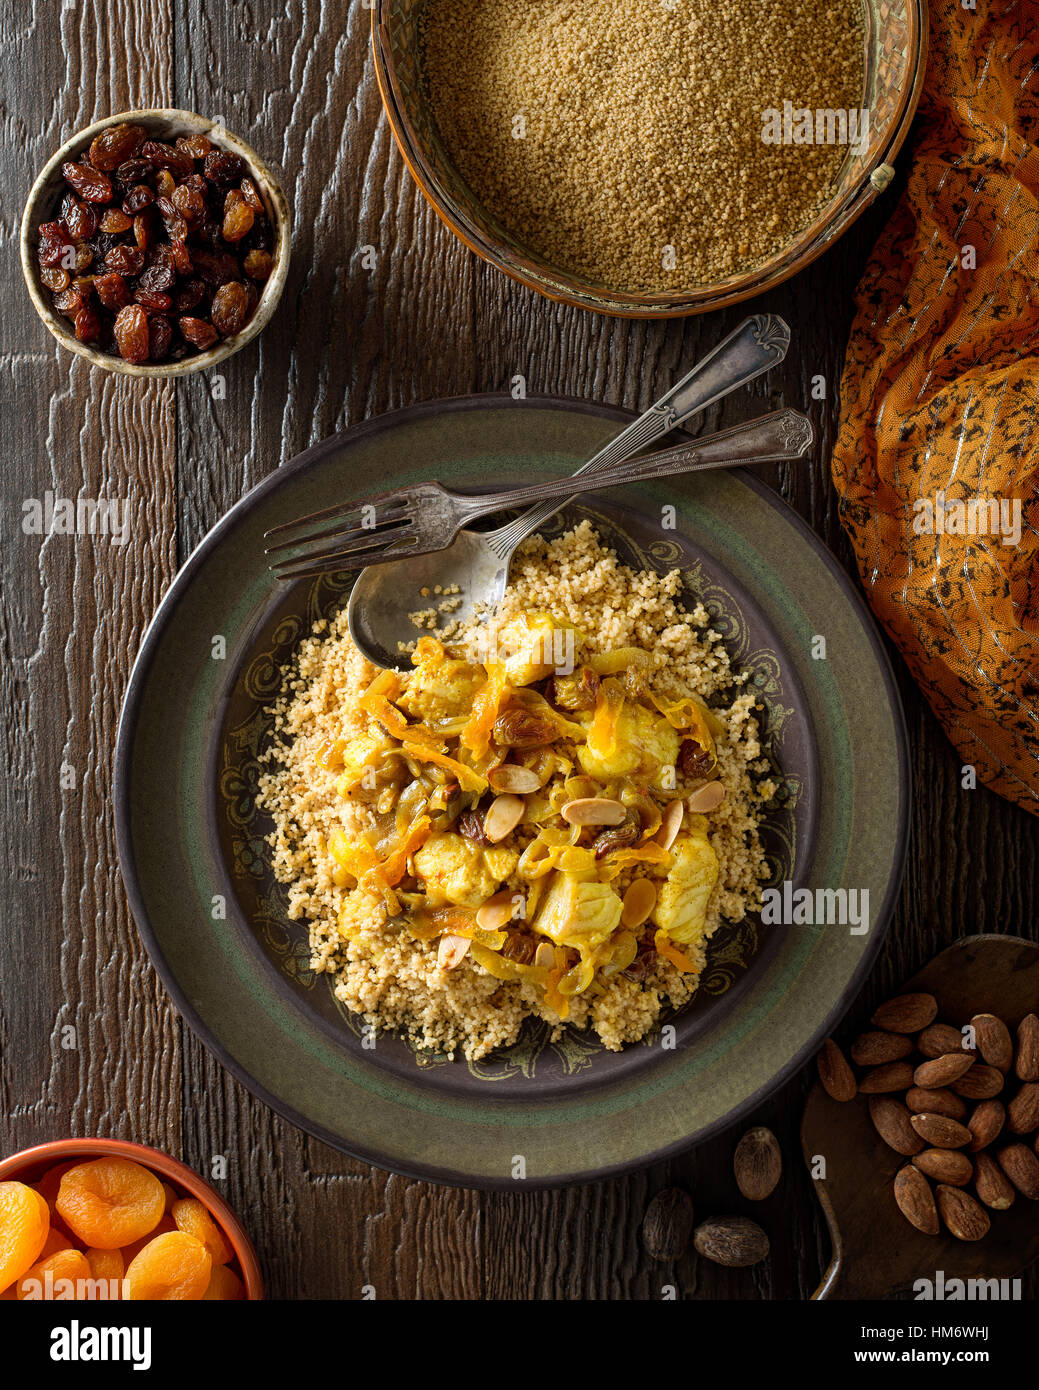 Delicious homemade Tunisian style couscous with fish, raisins, apricots, and toasted almond. Stock Photo